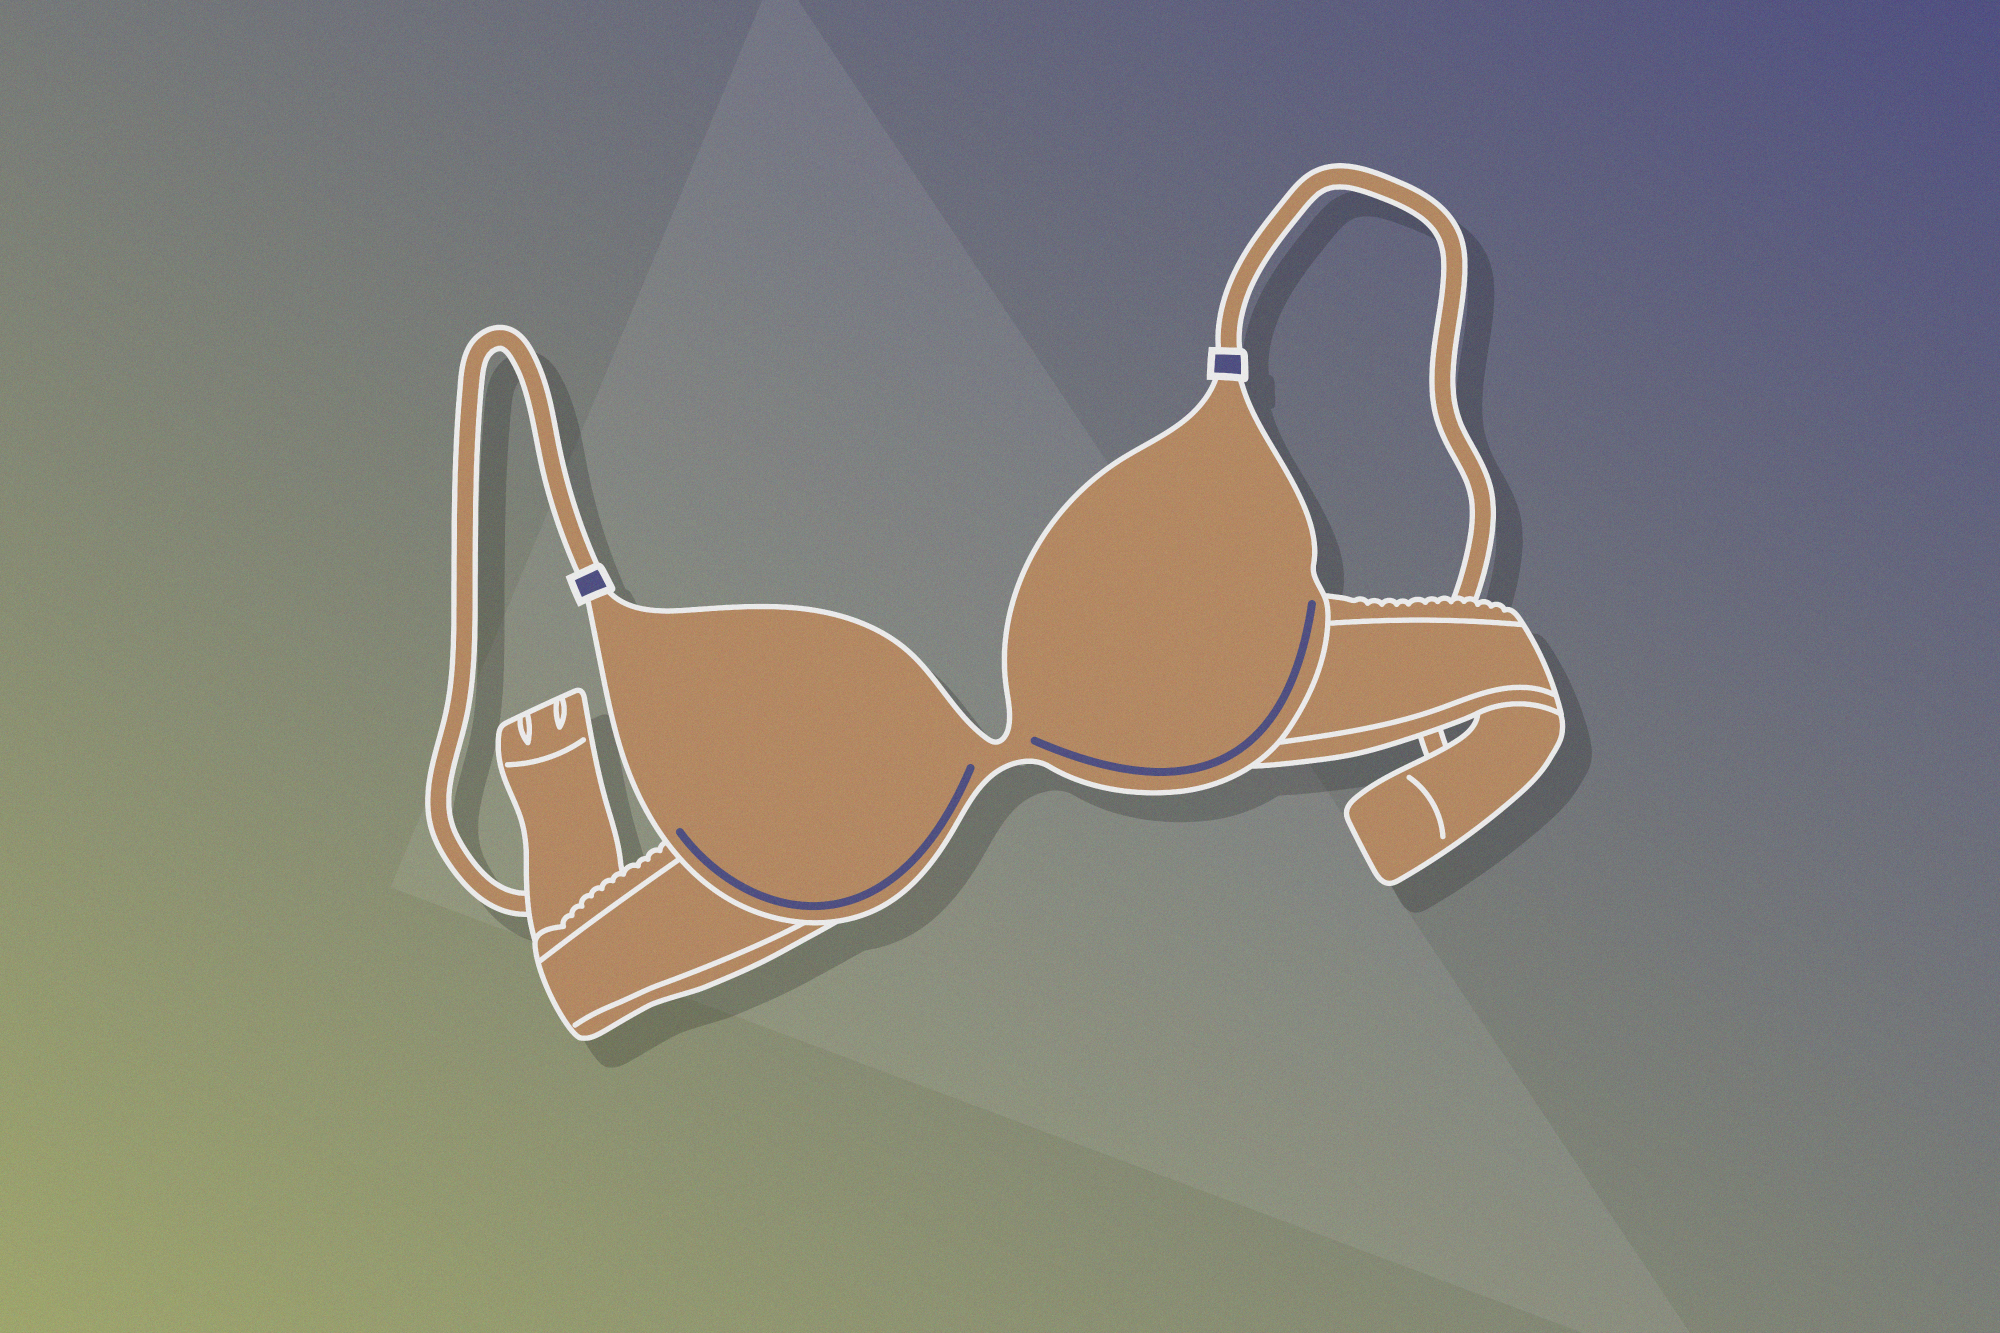 Do you wear bras every day? Watch out for breast cancer, study